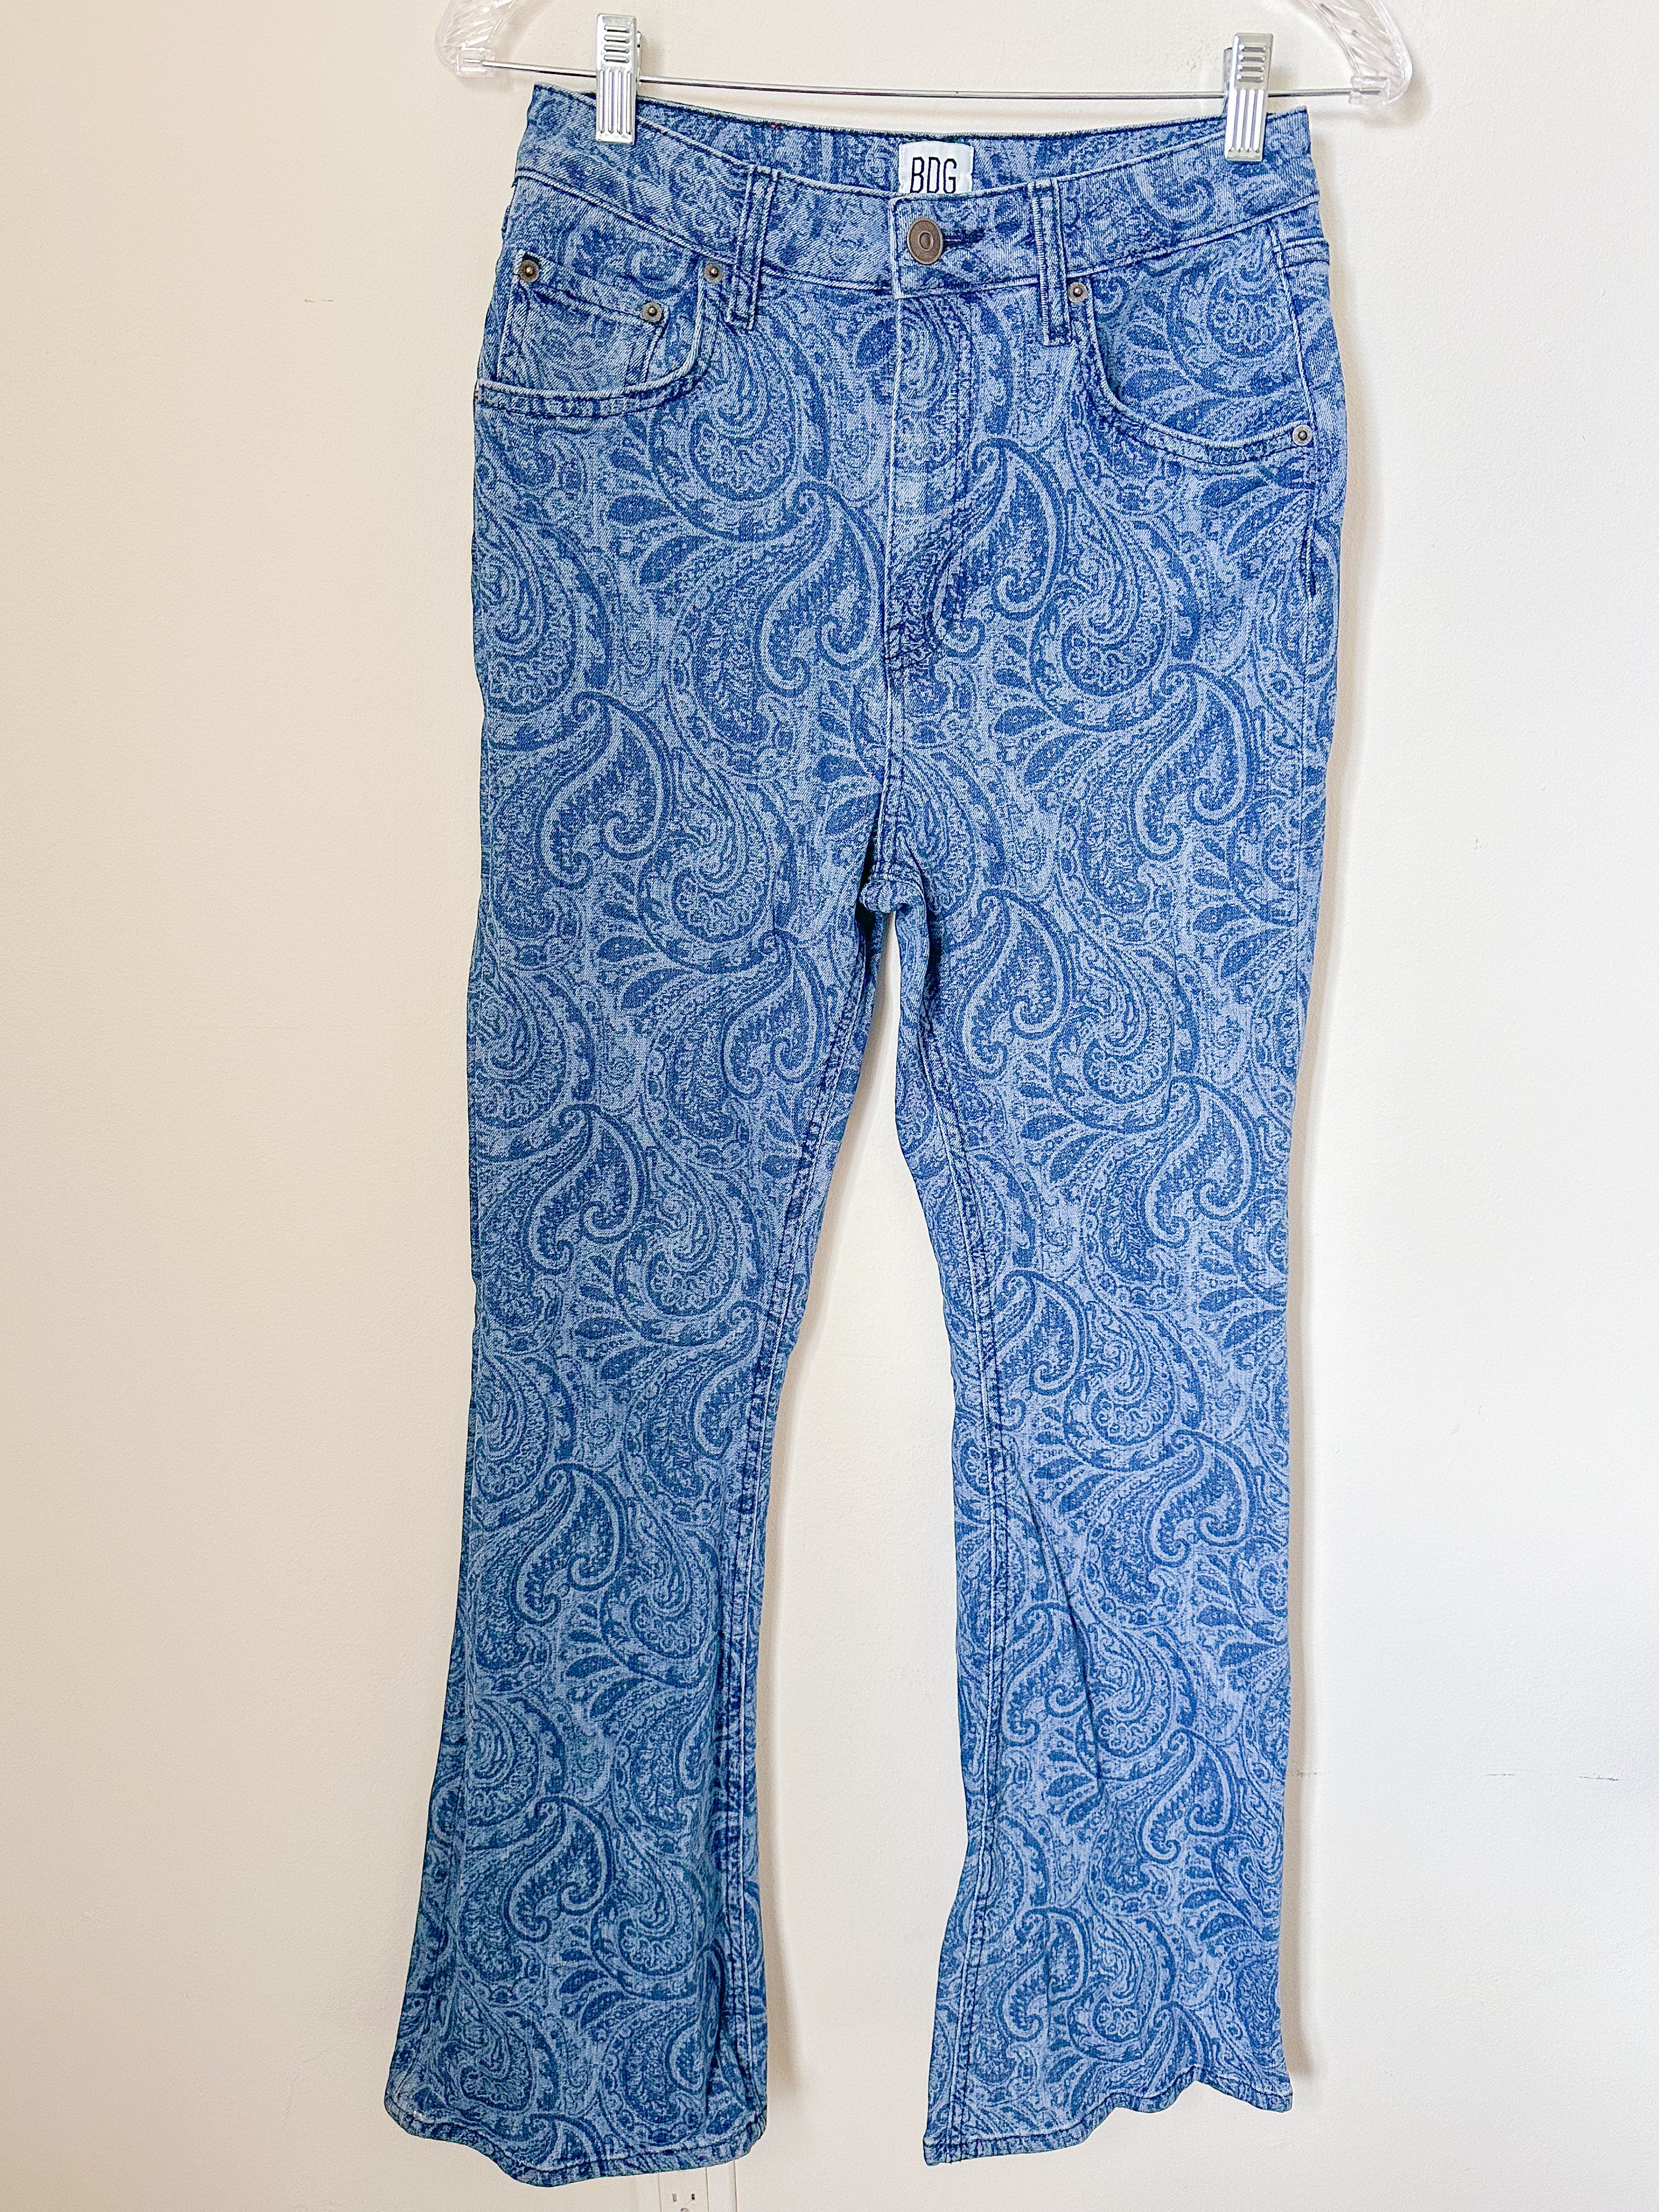 BDG Paisley Print PJ Pants - Assorted M at Urban Outfitters | Compare |  Trinity Leeds